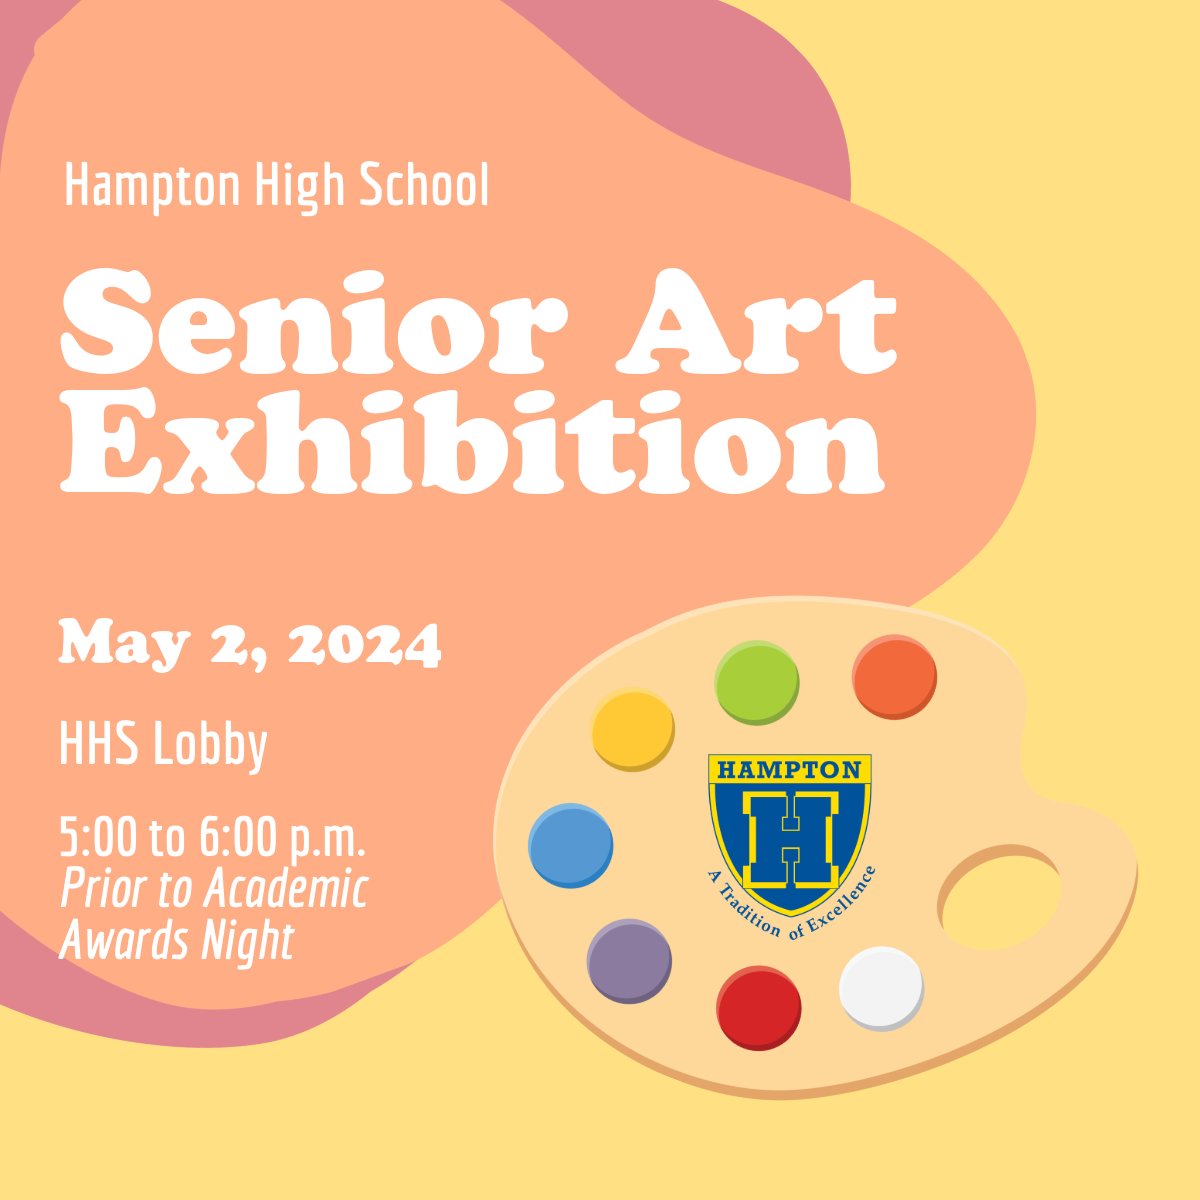 Ten HHS students will present their artwork portfolios during the Senior Art Exhibition on Thursday, May 2, from 5-6 p.m. in the HHS Lobby. We hope you can join us!